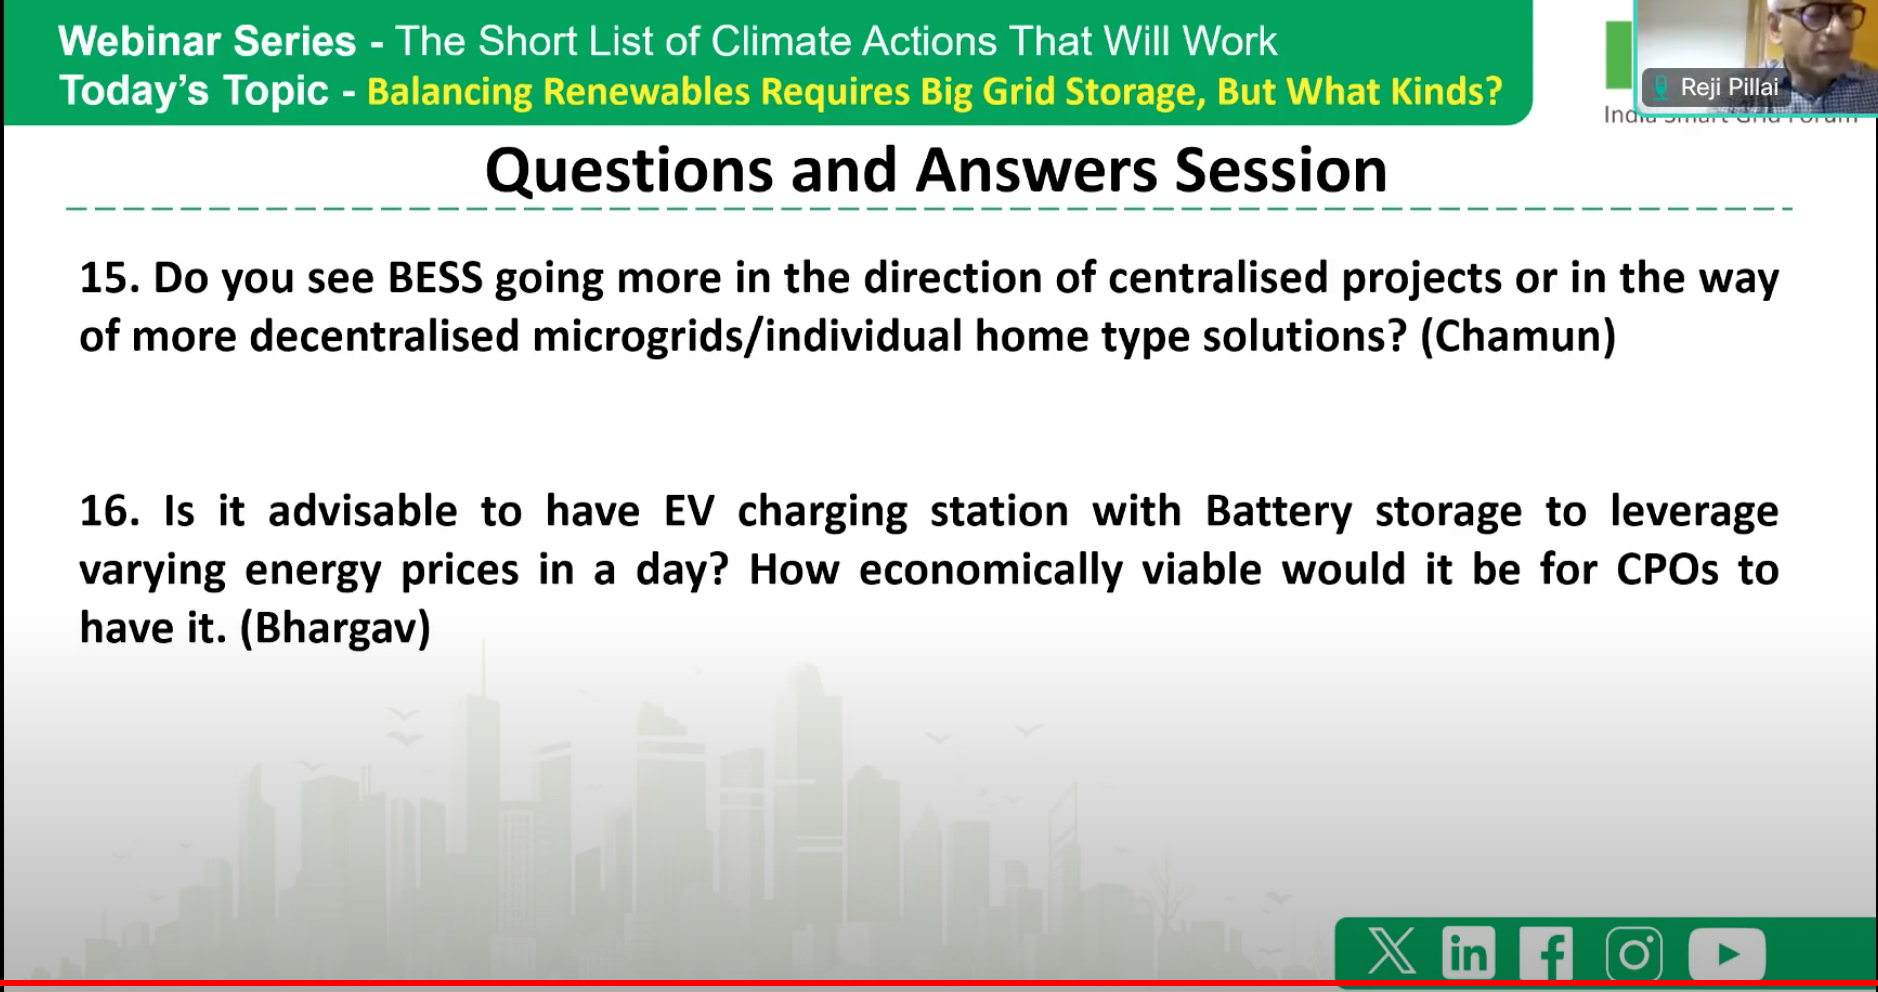 Questions from participants from Michael Barnard's seminar on grid storage through the Indian Smart Grid Forum